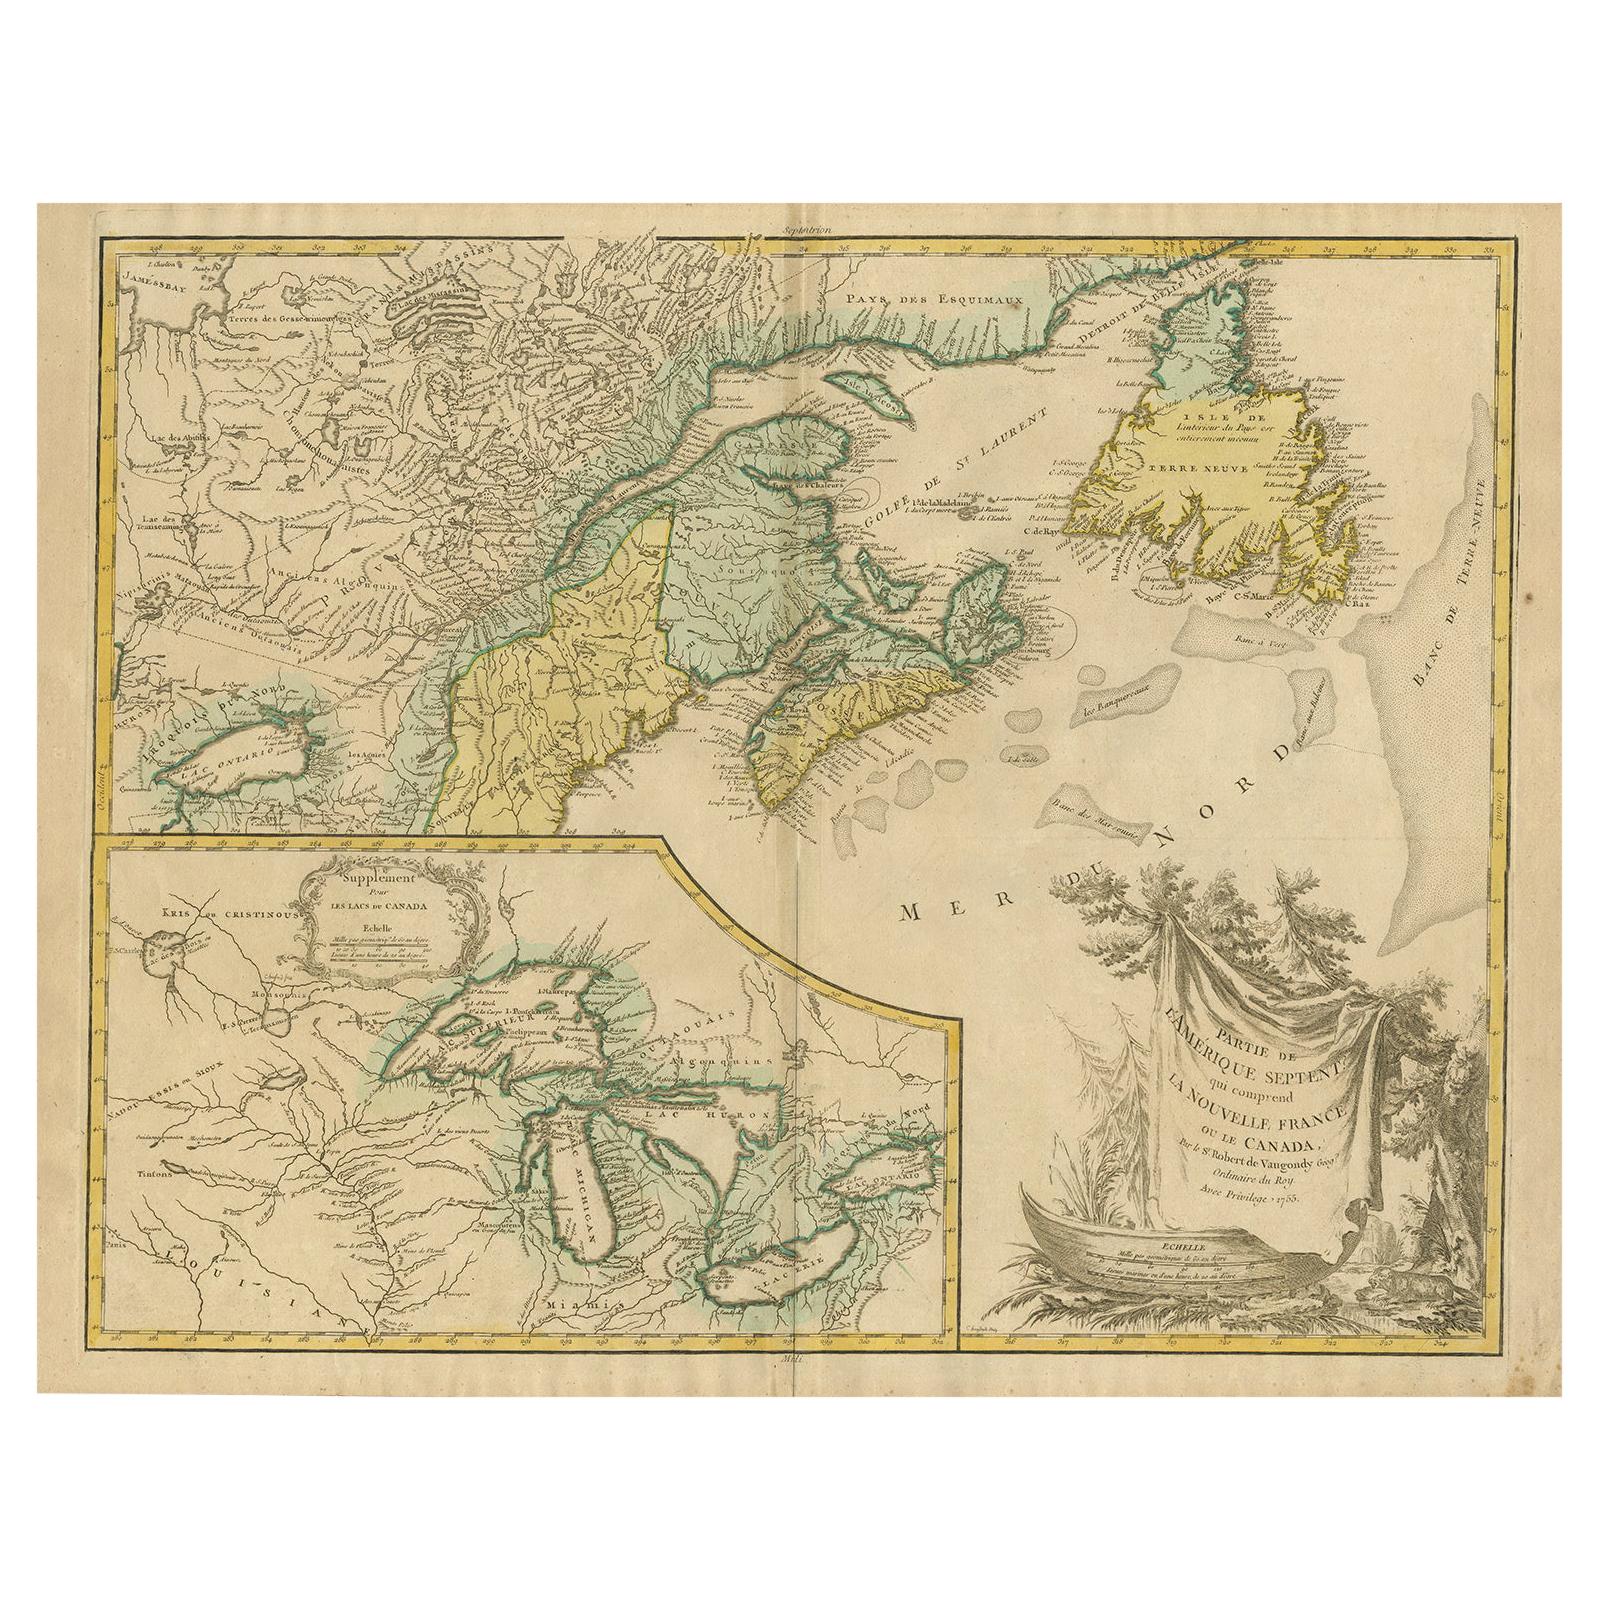 Antique Map of New England and Part of Canada by Vaugondy 'circa 1755'